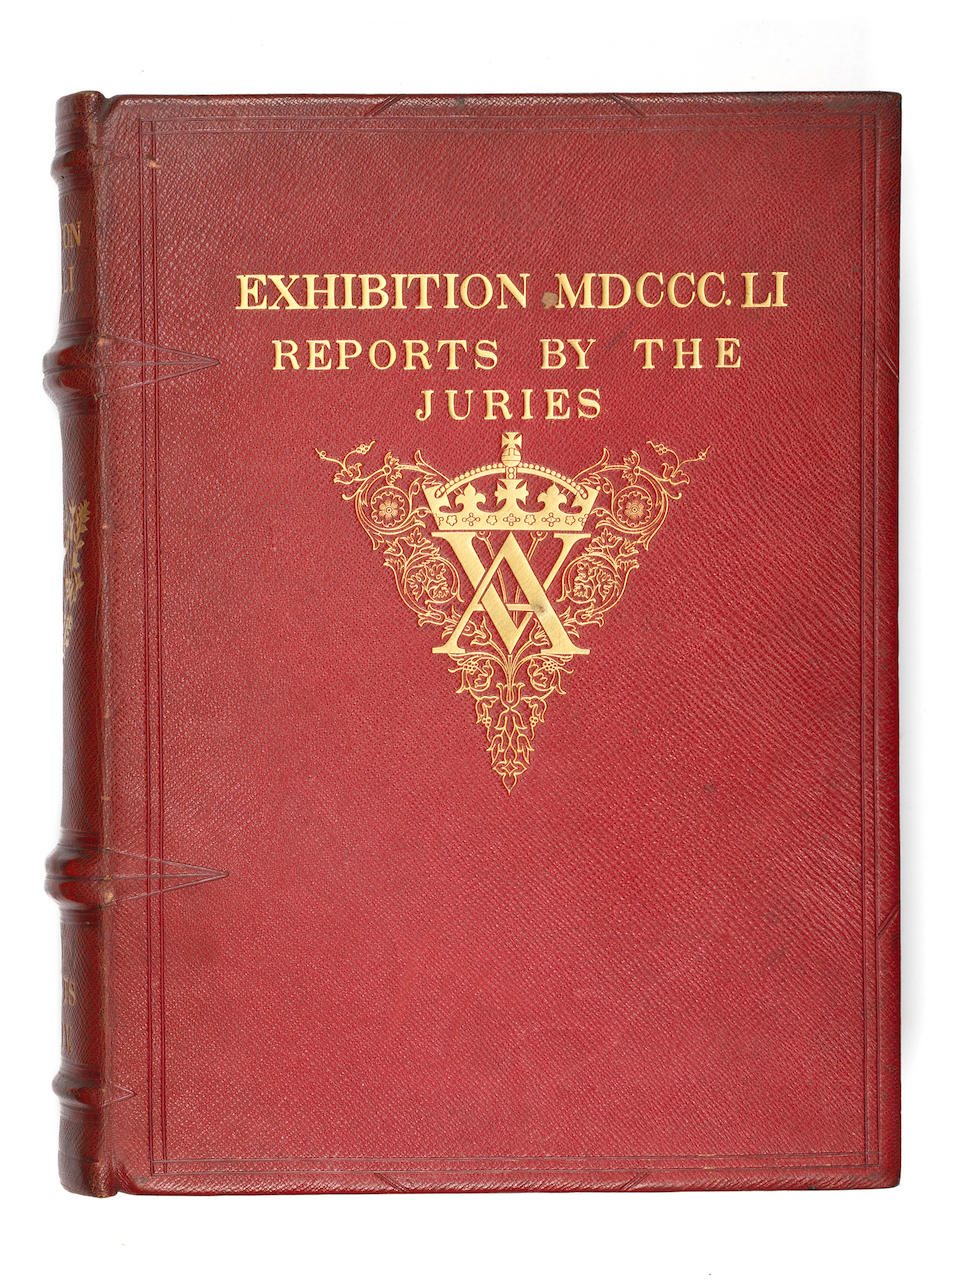 GREAT EXHIBITION and W.H. FOX TALBOT Exhibition of the Works of Industry of All Nations, 1851. Reports by the Juries on The Subjects in the Thirty Classes into which the Exhibition was Divided, 4. vol., ONE OF FIFTEEN COPIES GIVEN BY THE COMMISSIONERS TO WILLIAM FOX TALBOT